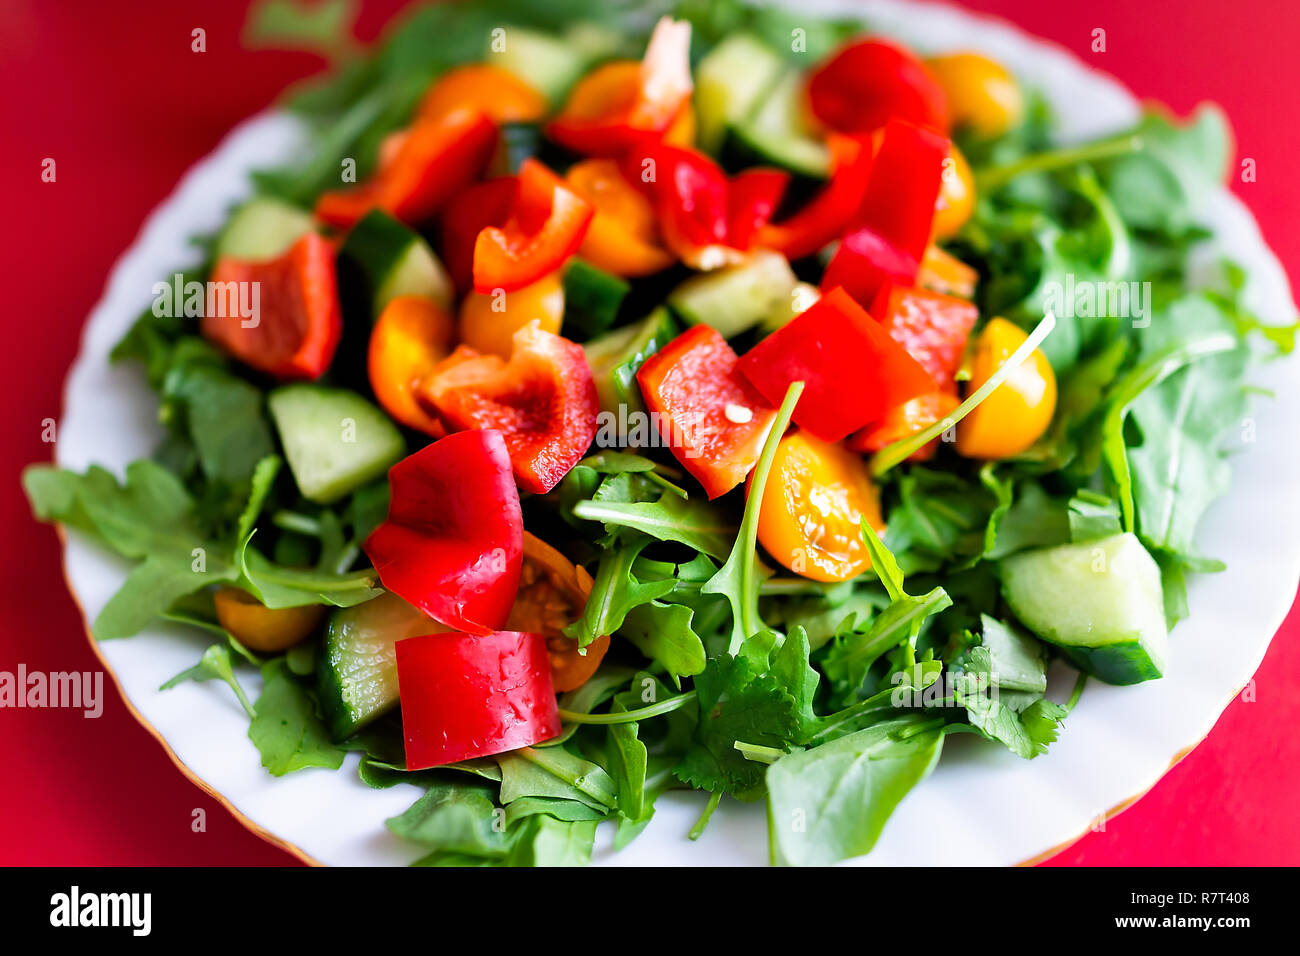 Closeup of fresh raw, chopped vegetable sald with arugula greens, red and orange bell peppers, tomatoes, cucumbers on table, colorful vibrant healthy  Stock Photo